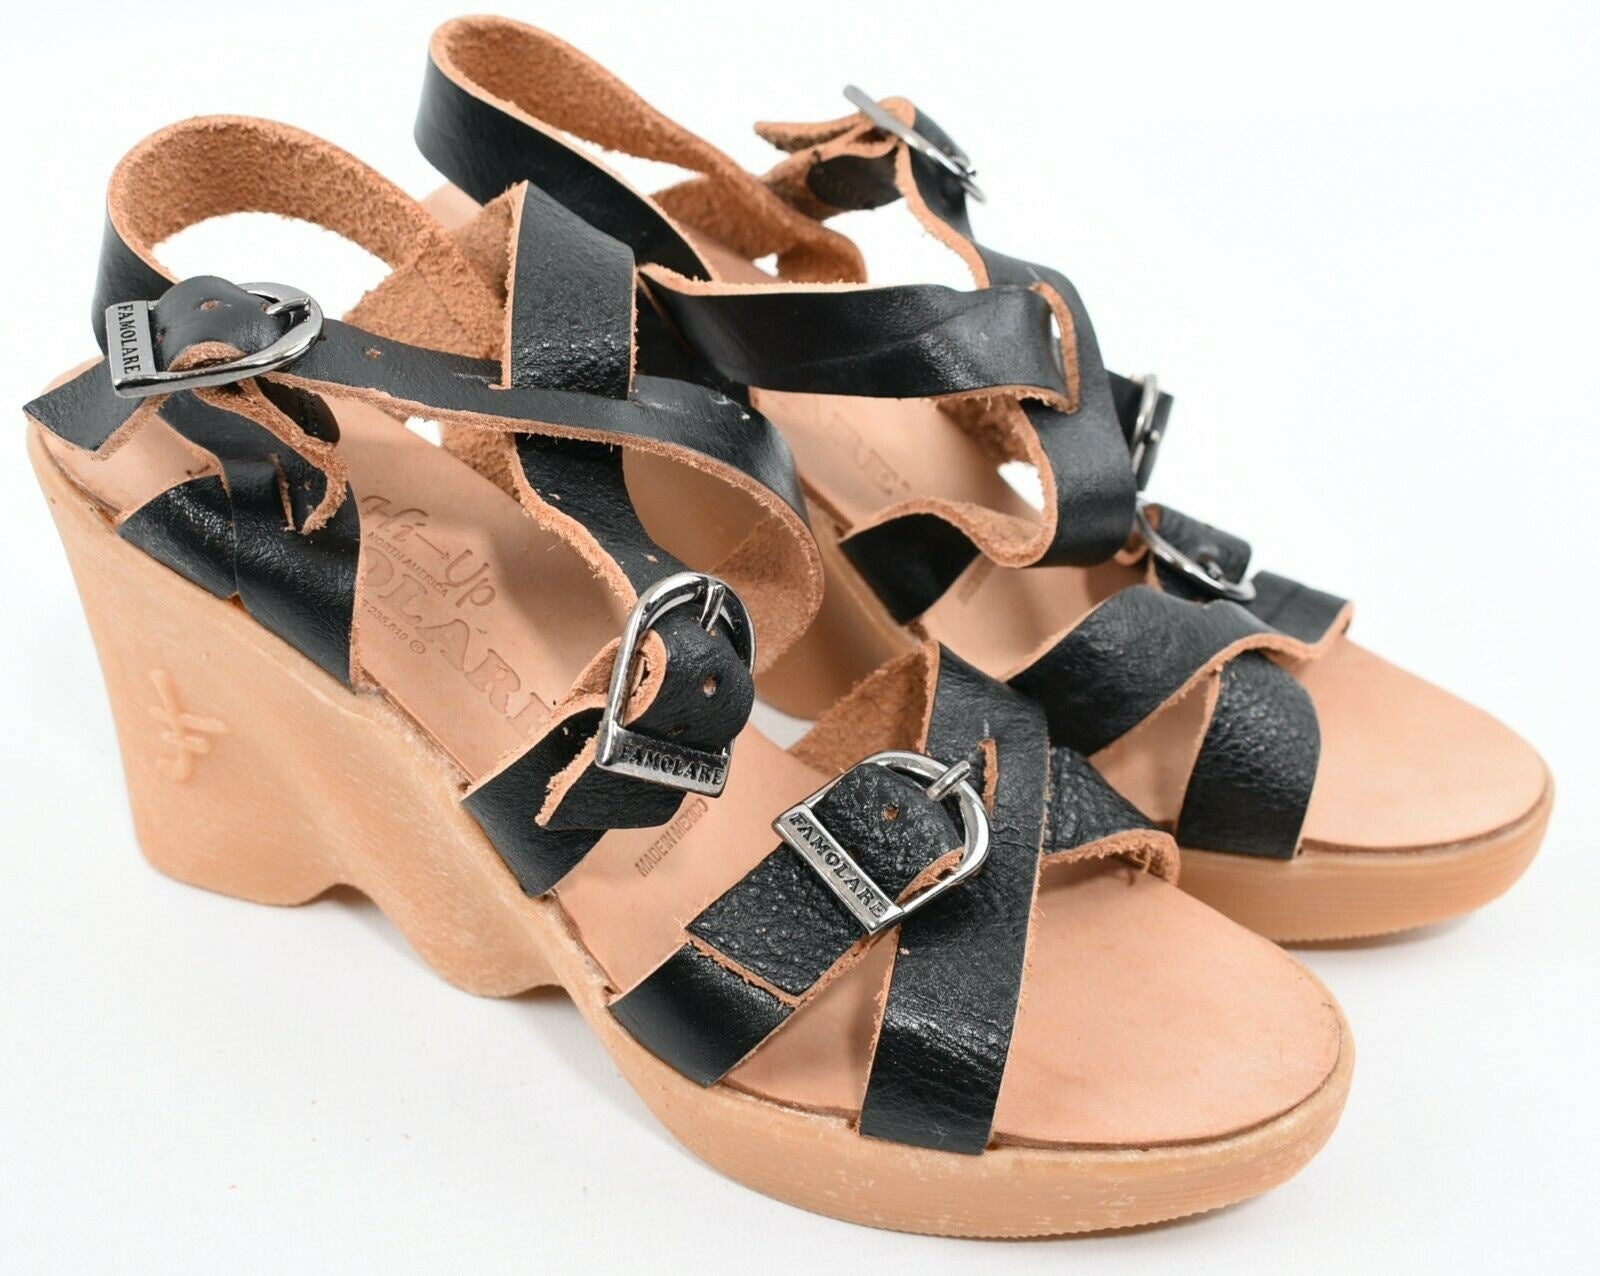 FAMOLARE Women's Black Strappy Leather Wedge Sandals, size UK 4.5